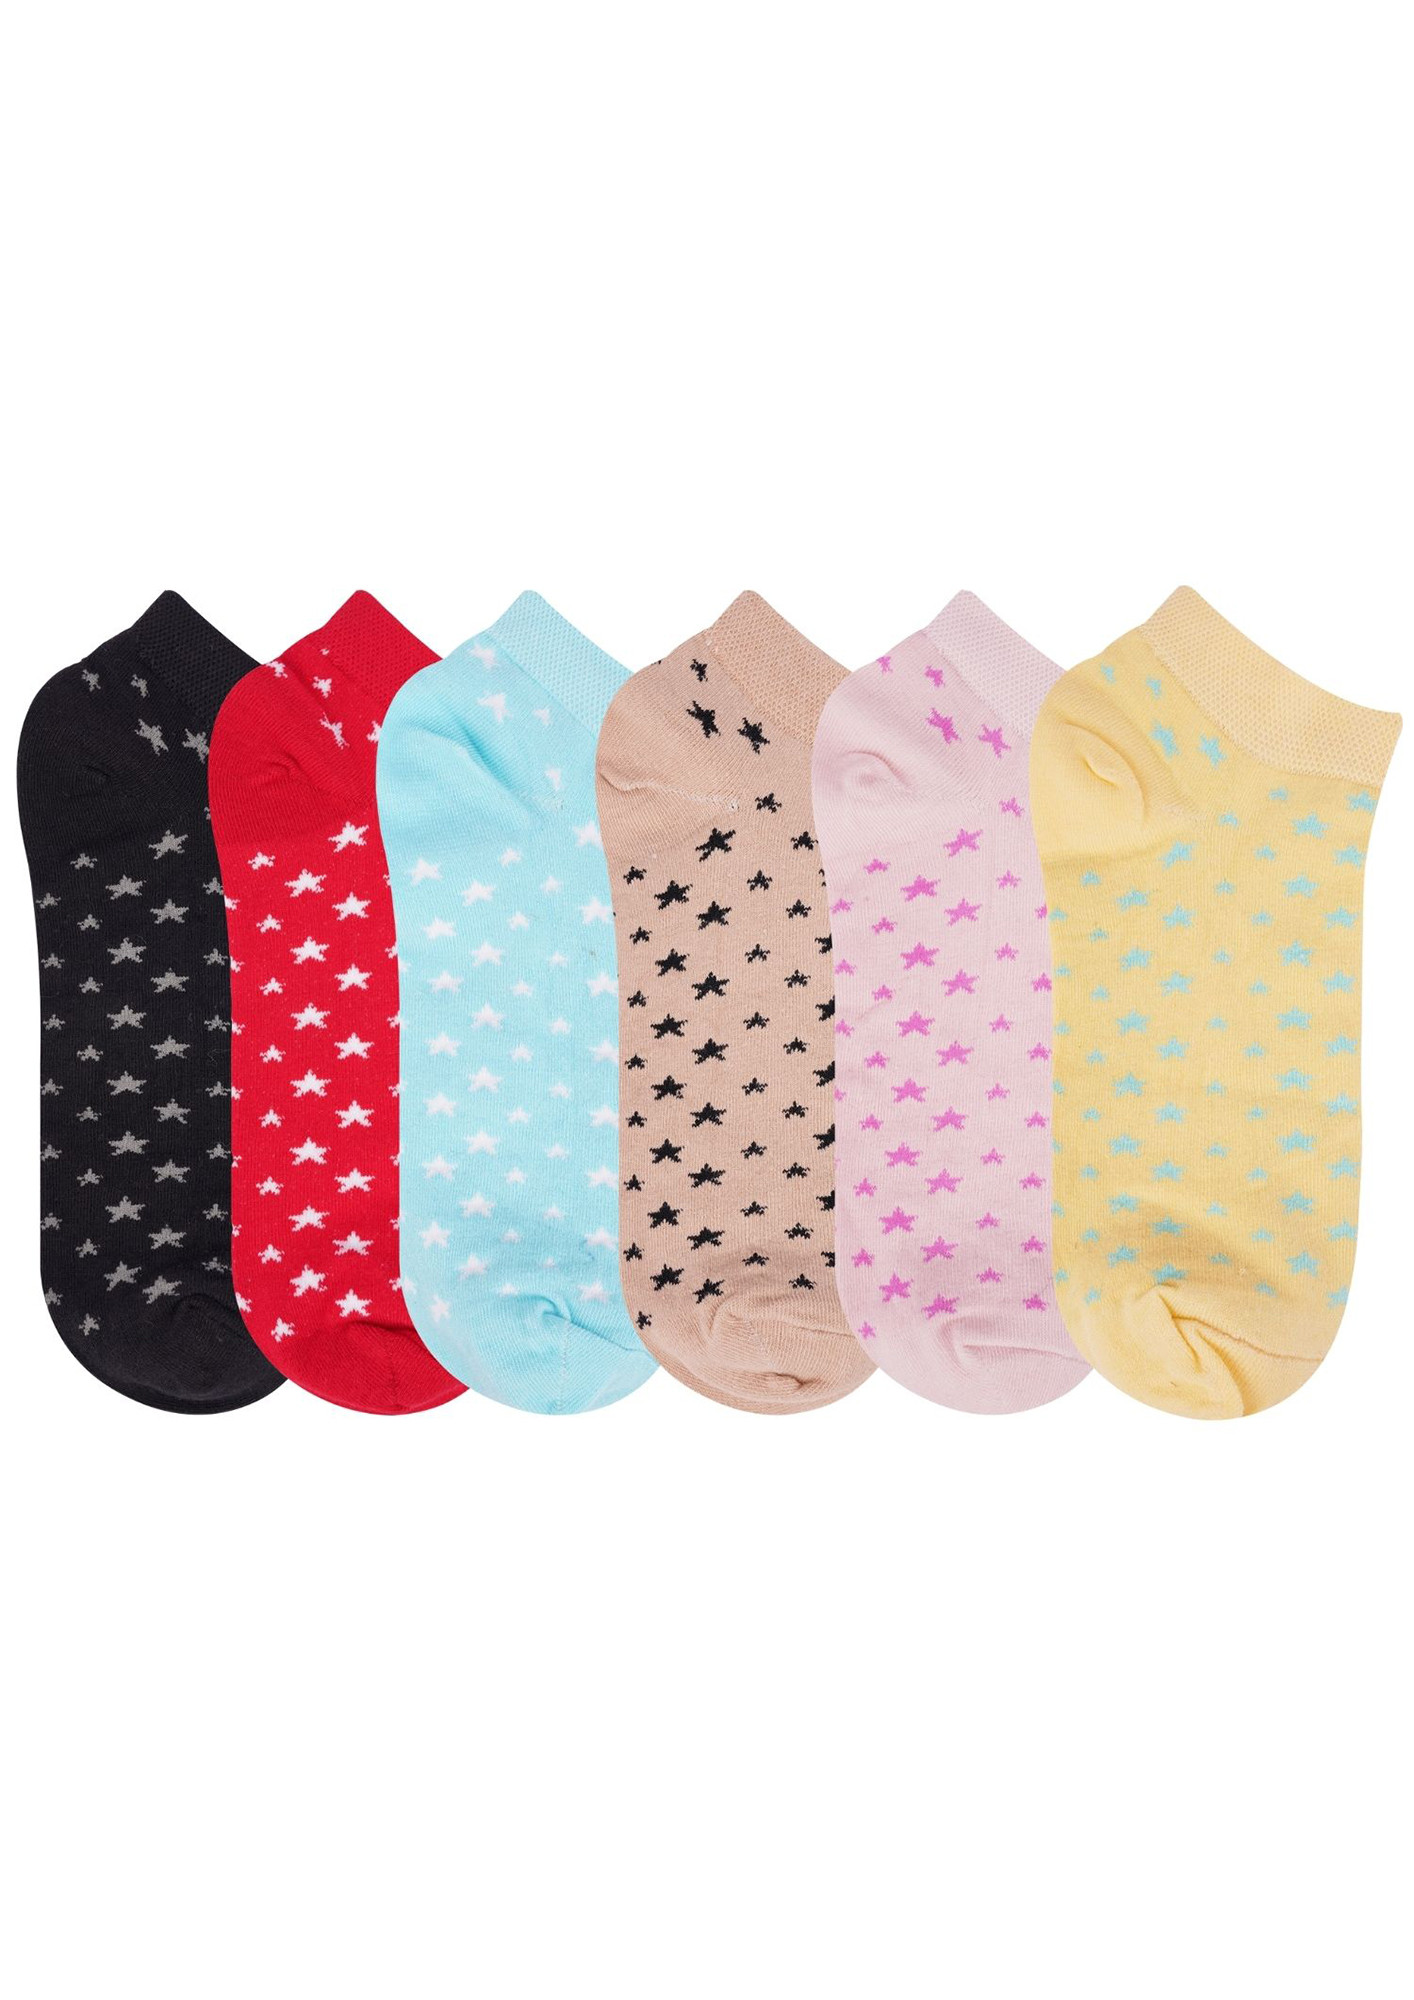 N2S NEXT2SKIN Women's Low Ankle Length Star Pattern Cotton Socks - Pack of 6 Pairs, Multicolor